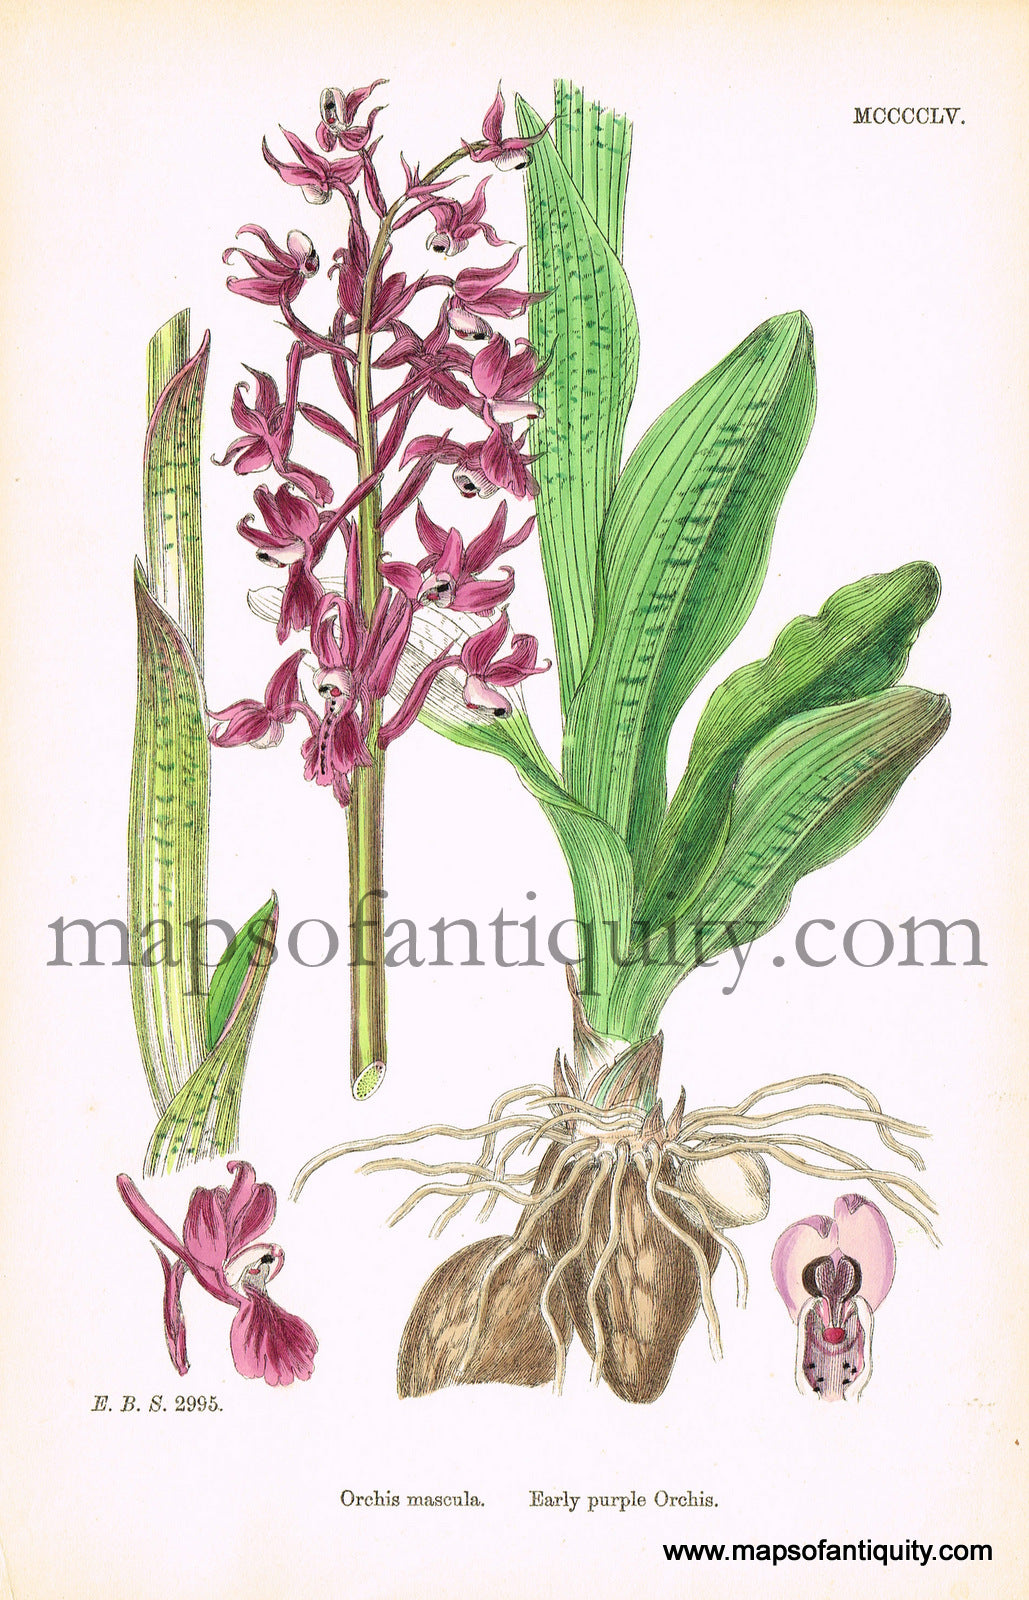 Antique-Hand-Colored-Print-Orchis-mascula-Antique-Prints-Natural-History-Botanical-c.-1860-Sowerby-Maps-Of-Antiquity